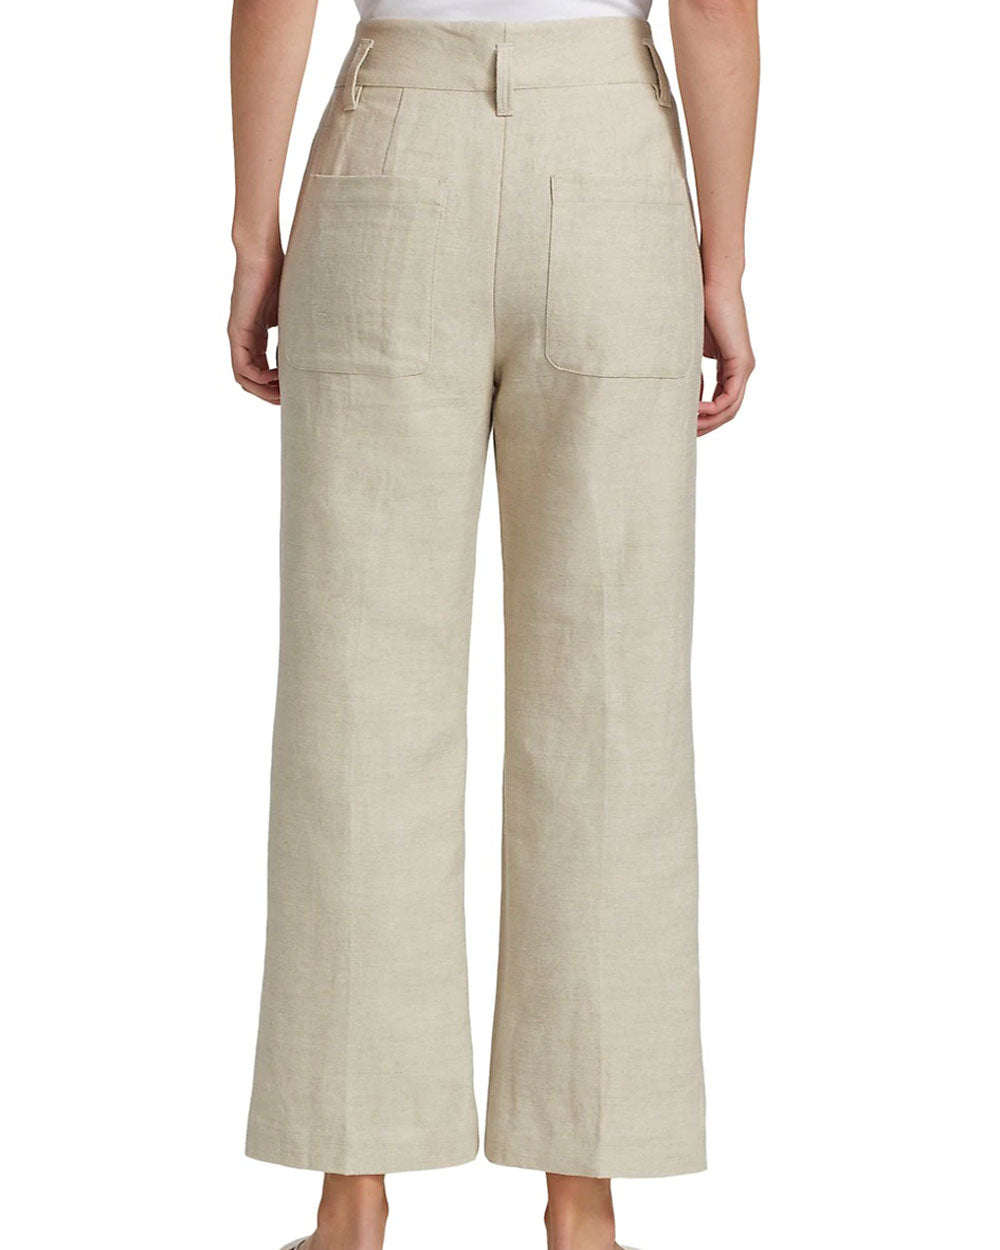 Oyster Linen Kick Flare Pant